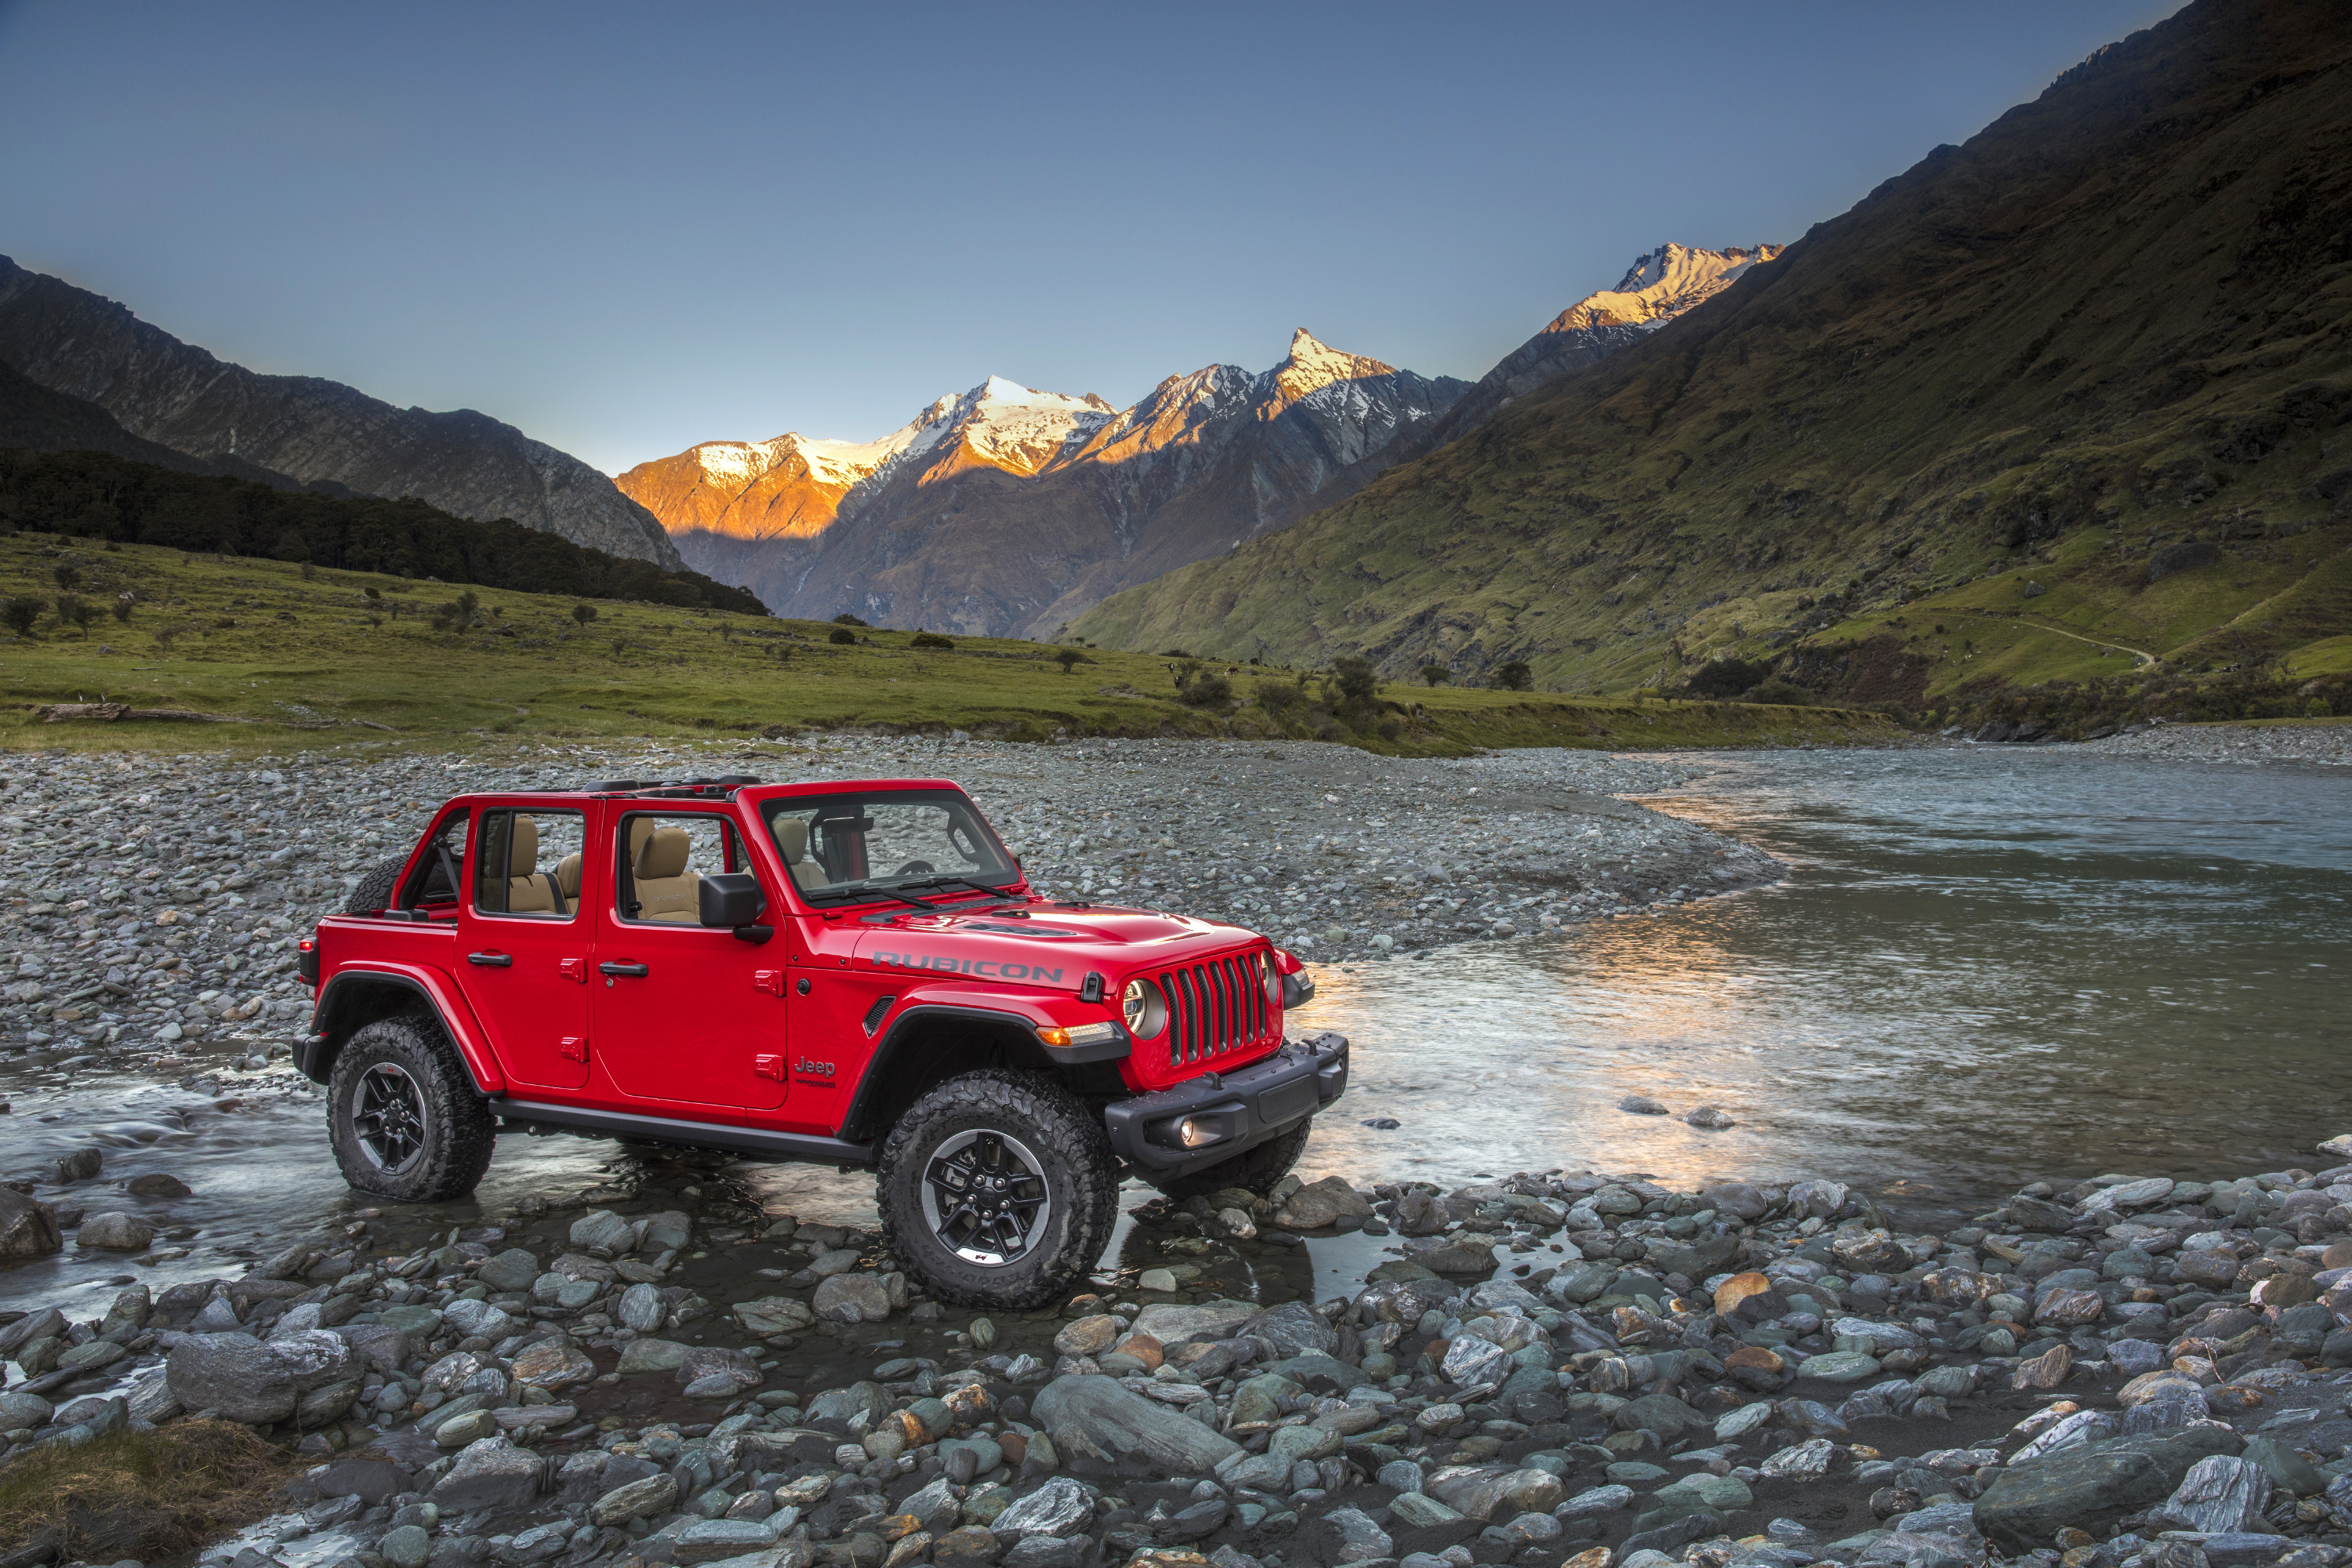 Jeep has a mysterious appeal to the risk-averse